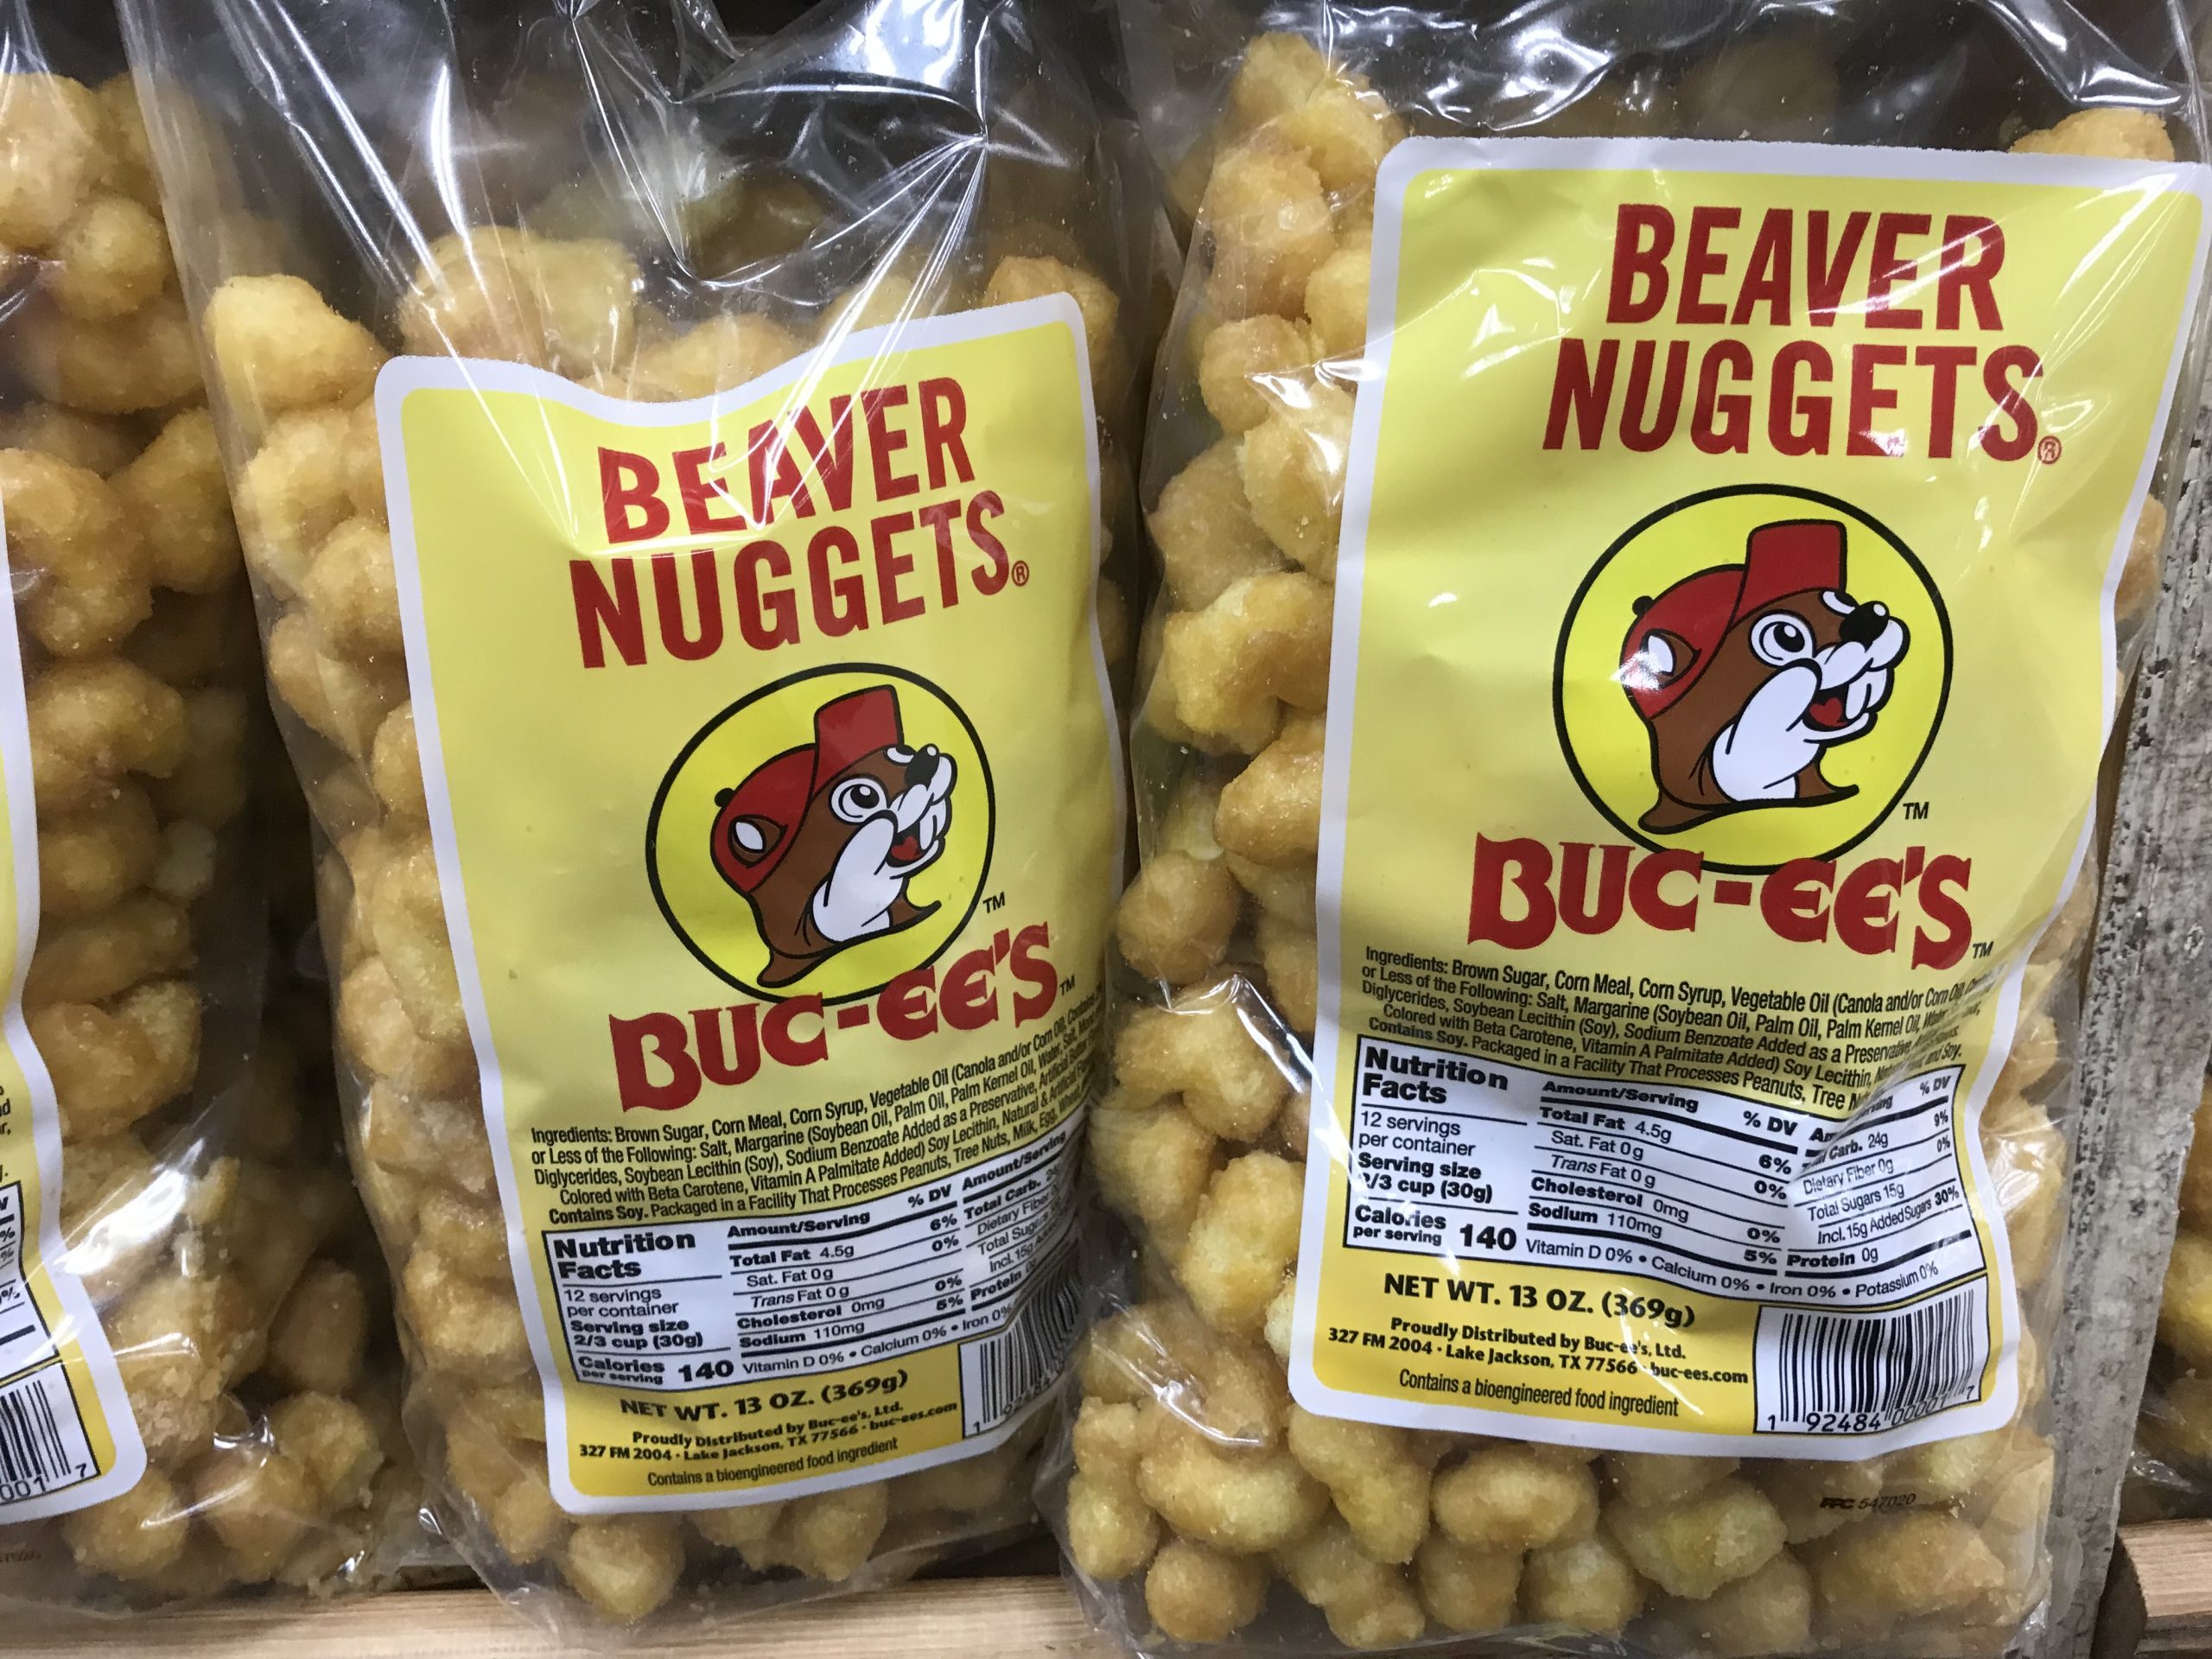 Springfield City Council signs off on Buc-ee’s incentive agreement